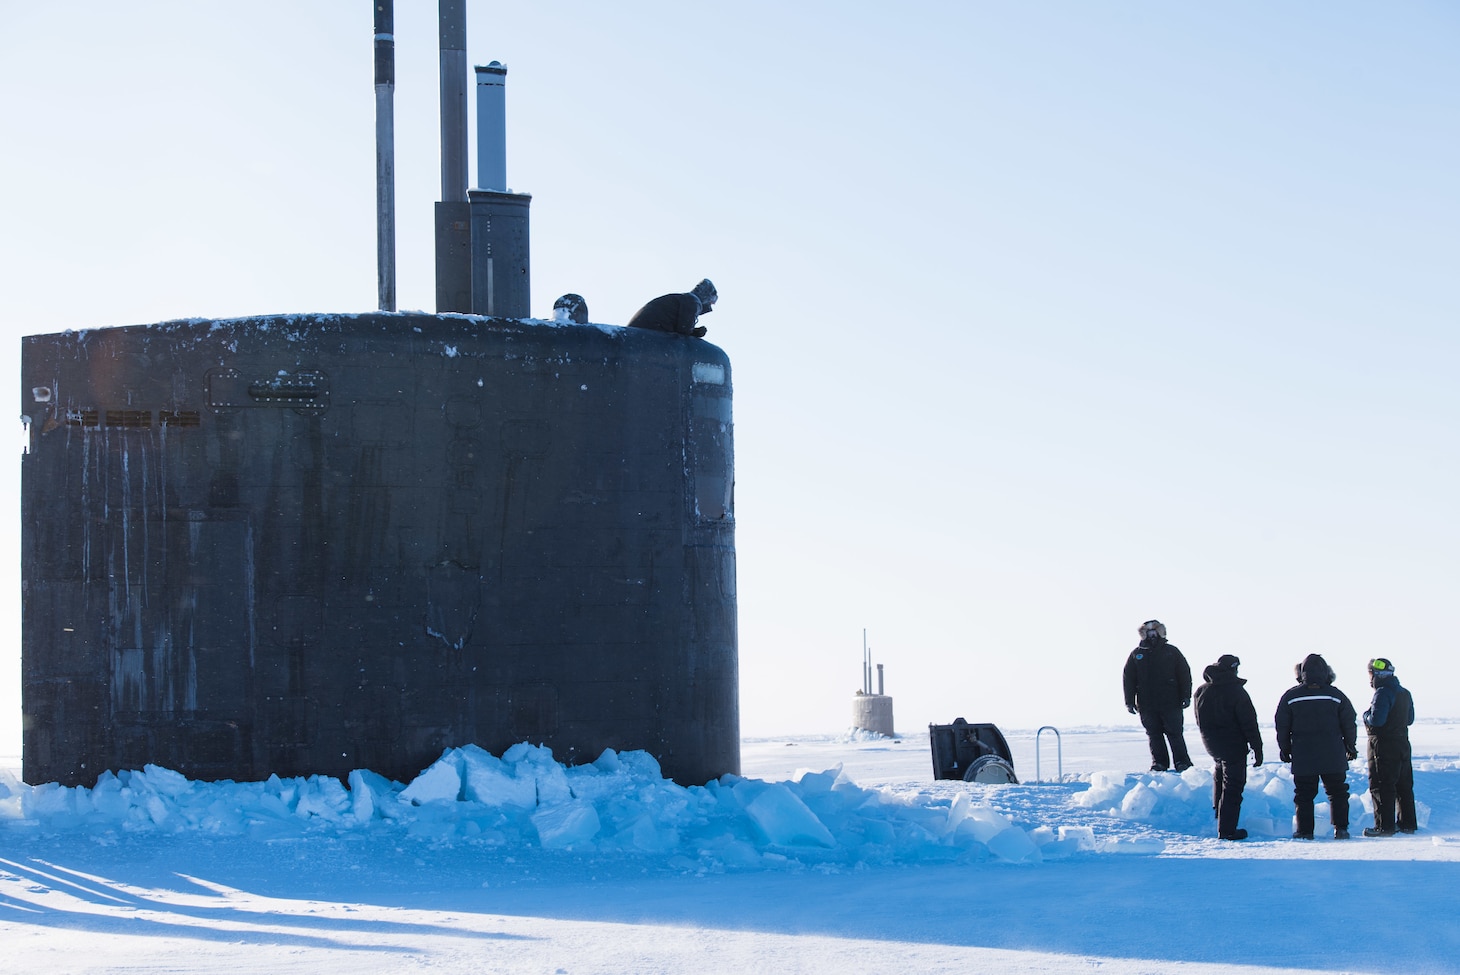 Ice Camp Skate (March 9, 2018) – Los Angeles-class fast-attack submarine USS Hartford SSN 768 surfaces through the ice March 9, 2018 in support of Ice Exercise (ICEX) 2018. ICEX 2018 is a five-week exercise that allows the Navy to assess its operational readiness in the Arctic, increase experience in the region, advance understanding of the Arctic environment, and continue to develop relationships with other services, allies and partner organizations. (U.S. Navy photo by Mass Communication 2nd Class Micheal H. Lee)